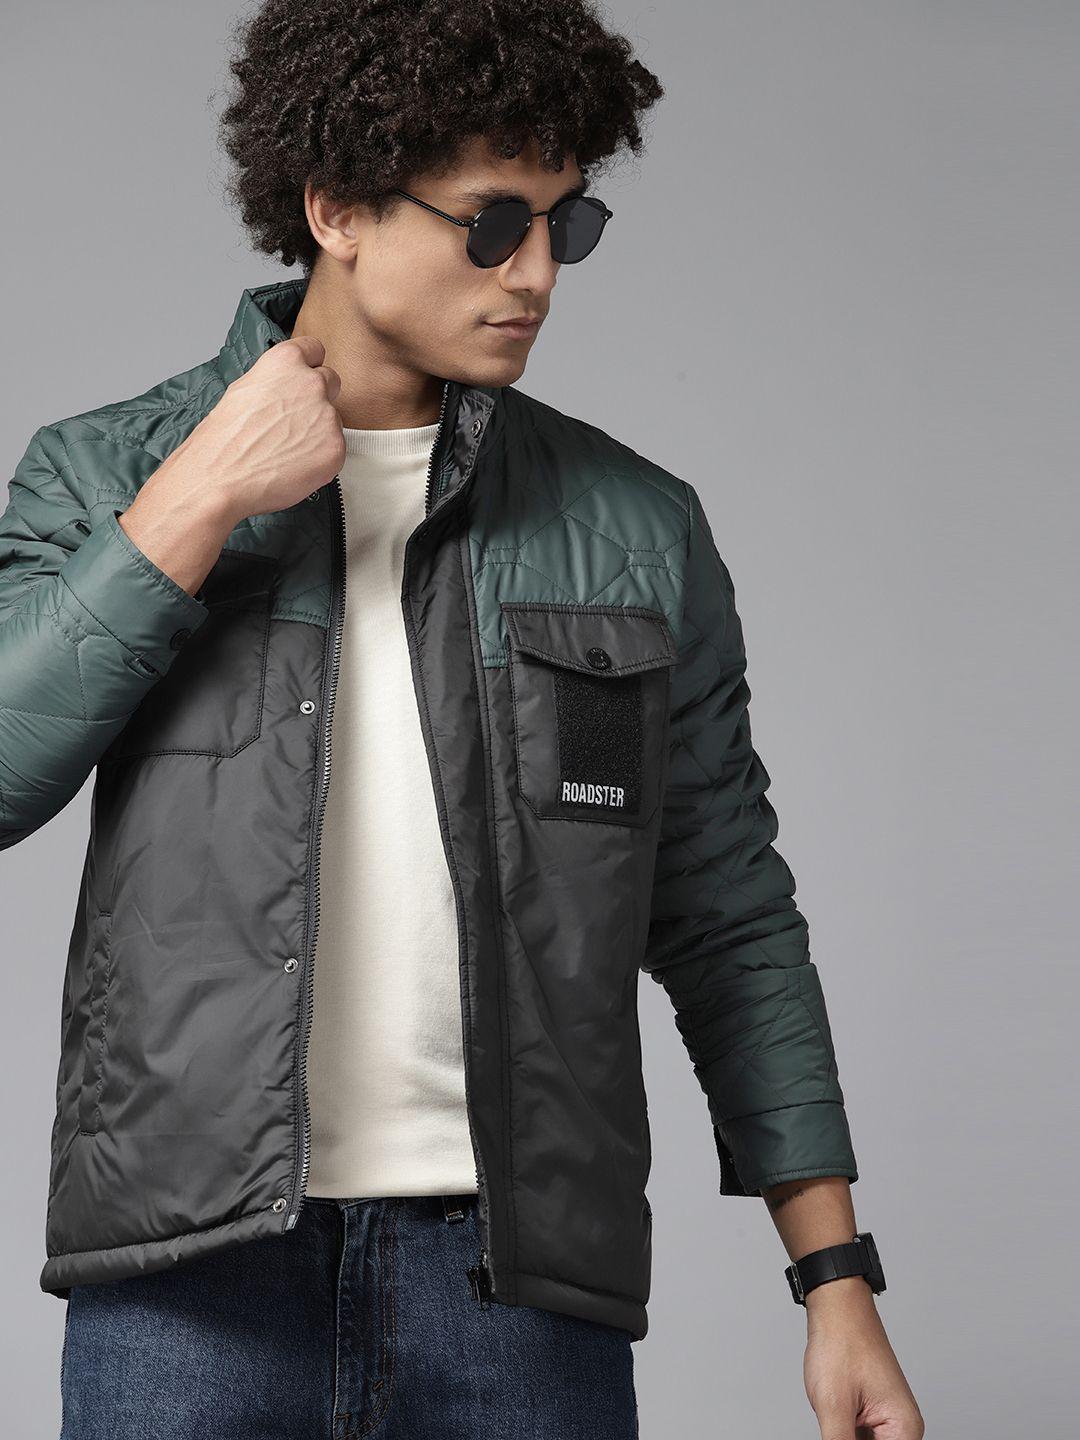 the roadster lifestyle co. colourblocked quilted jacket